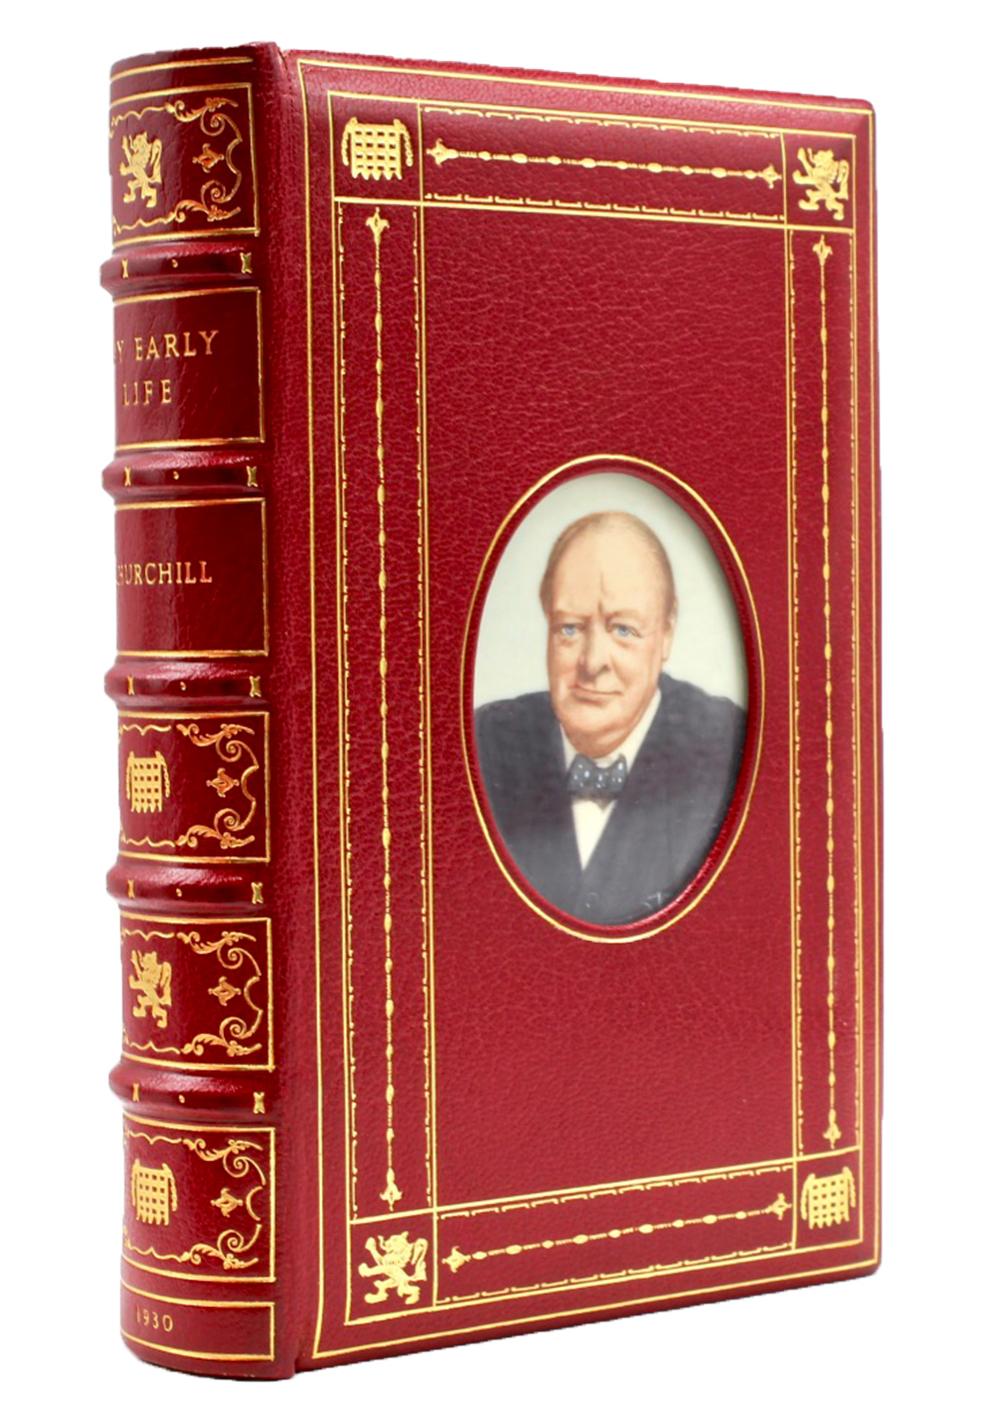 Churchill, Winston. My Early Life: A Roving Commission. London: Thornton Butterworth Limited, 1930. First edition, first printing. Octavo. Bound in full red crushed Morocco leather with Cosway-style portrait of Churchill, elaborate gilt tooling and